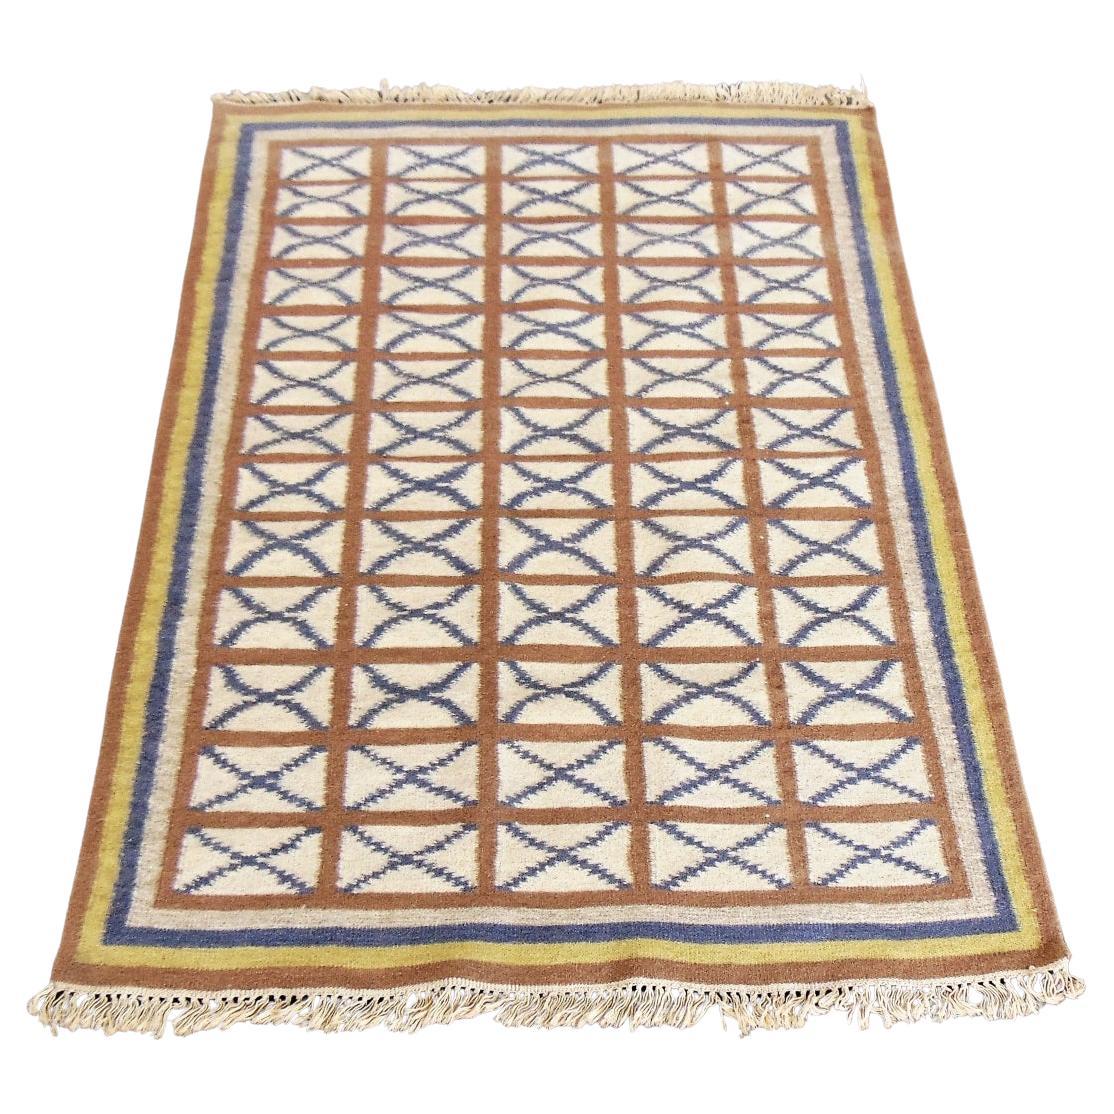 1975 Handwoven Kilim Vintage Indian Rug Blue Brown Yellow Ivory Background India For Sale